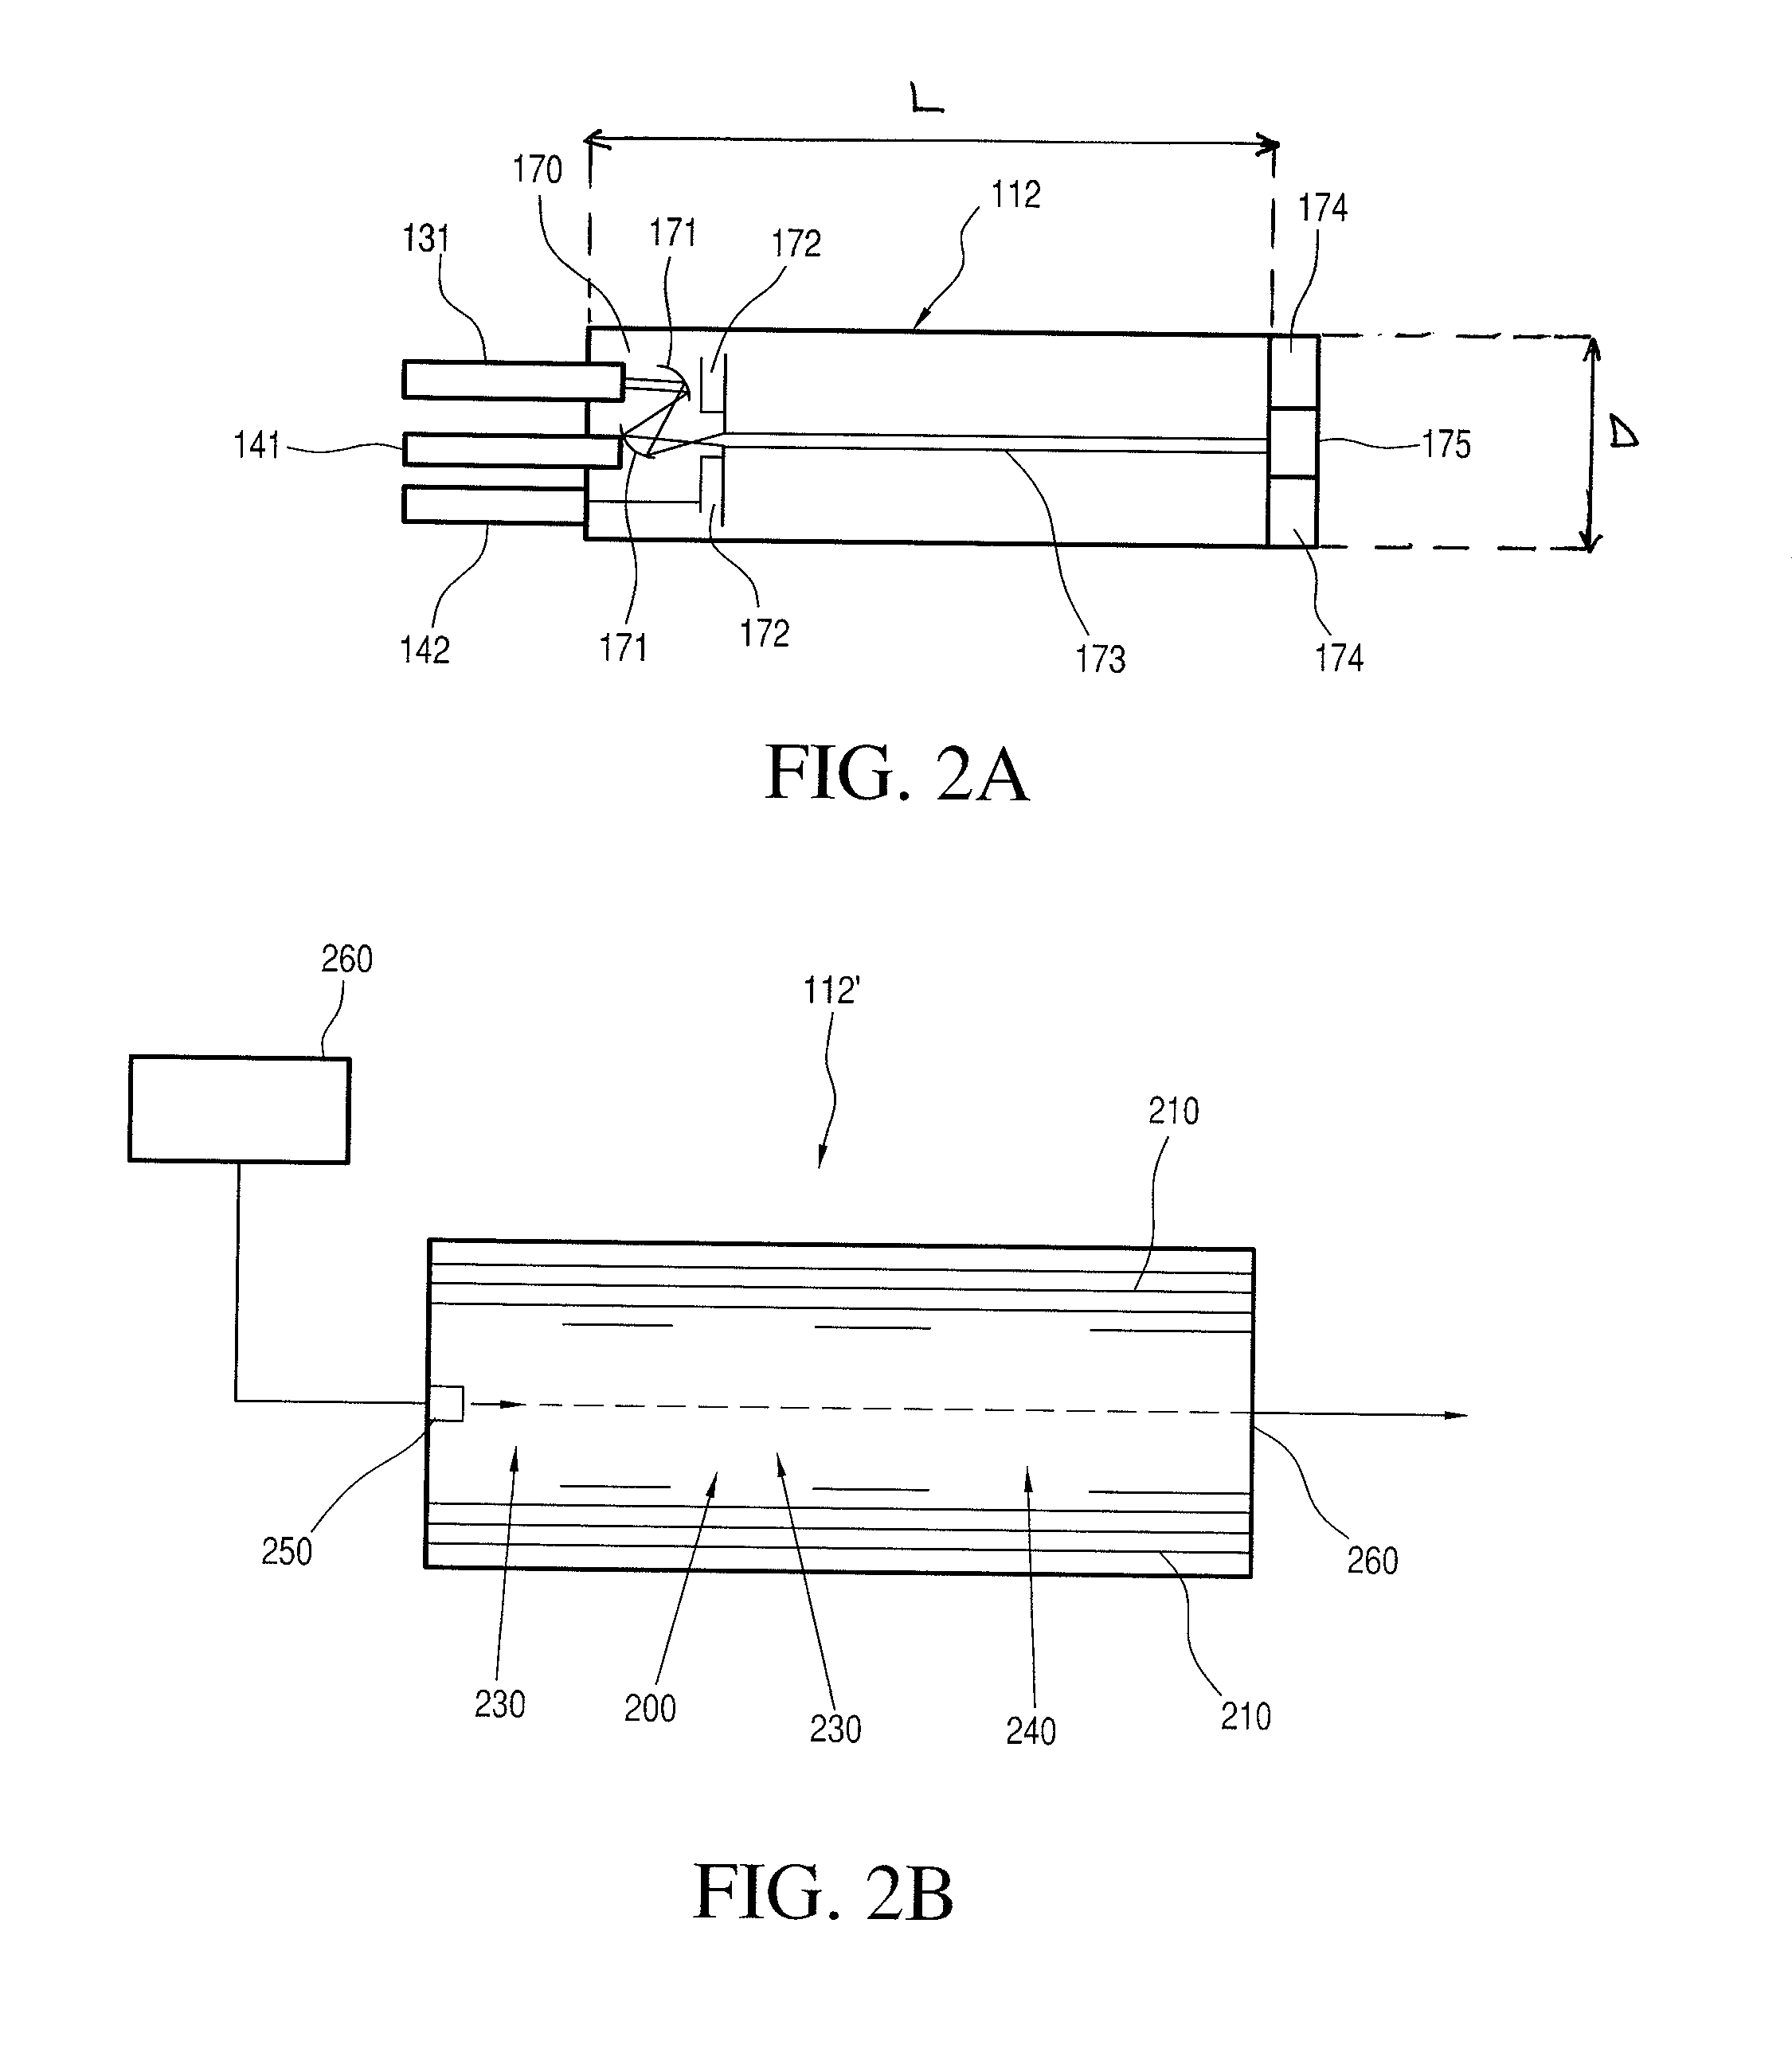 Laser accelerator driven particle brachytherapy devices, systems, and methods